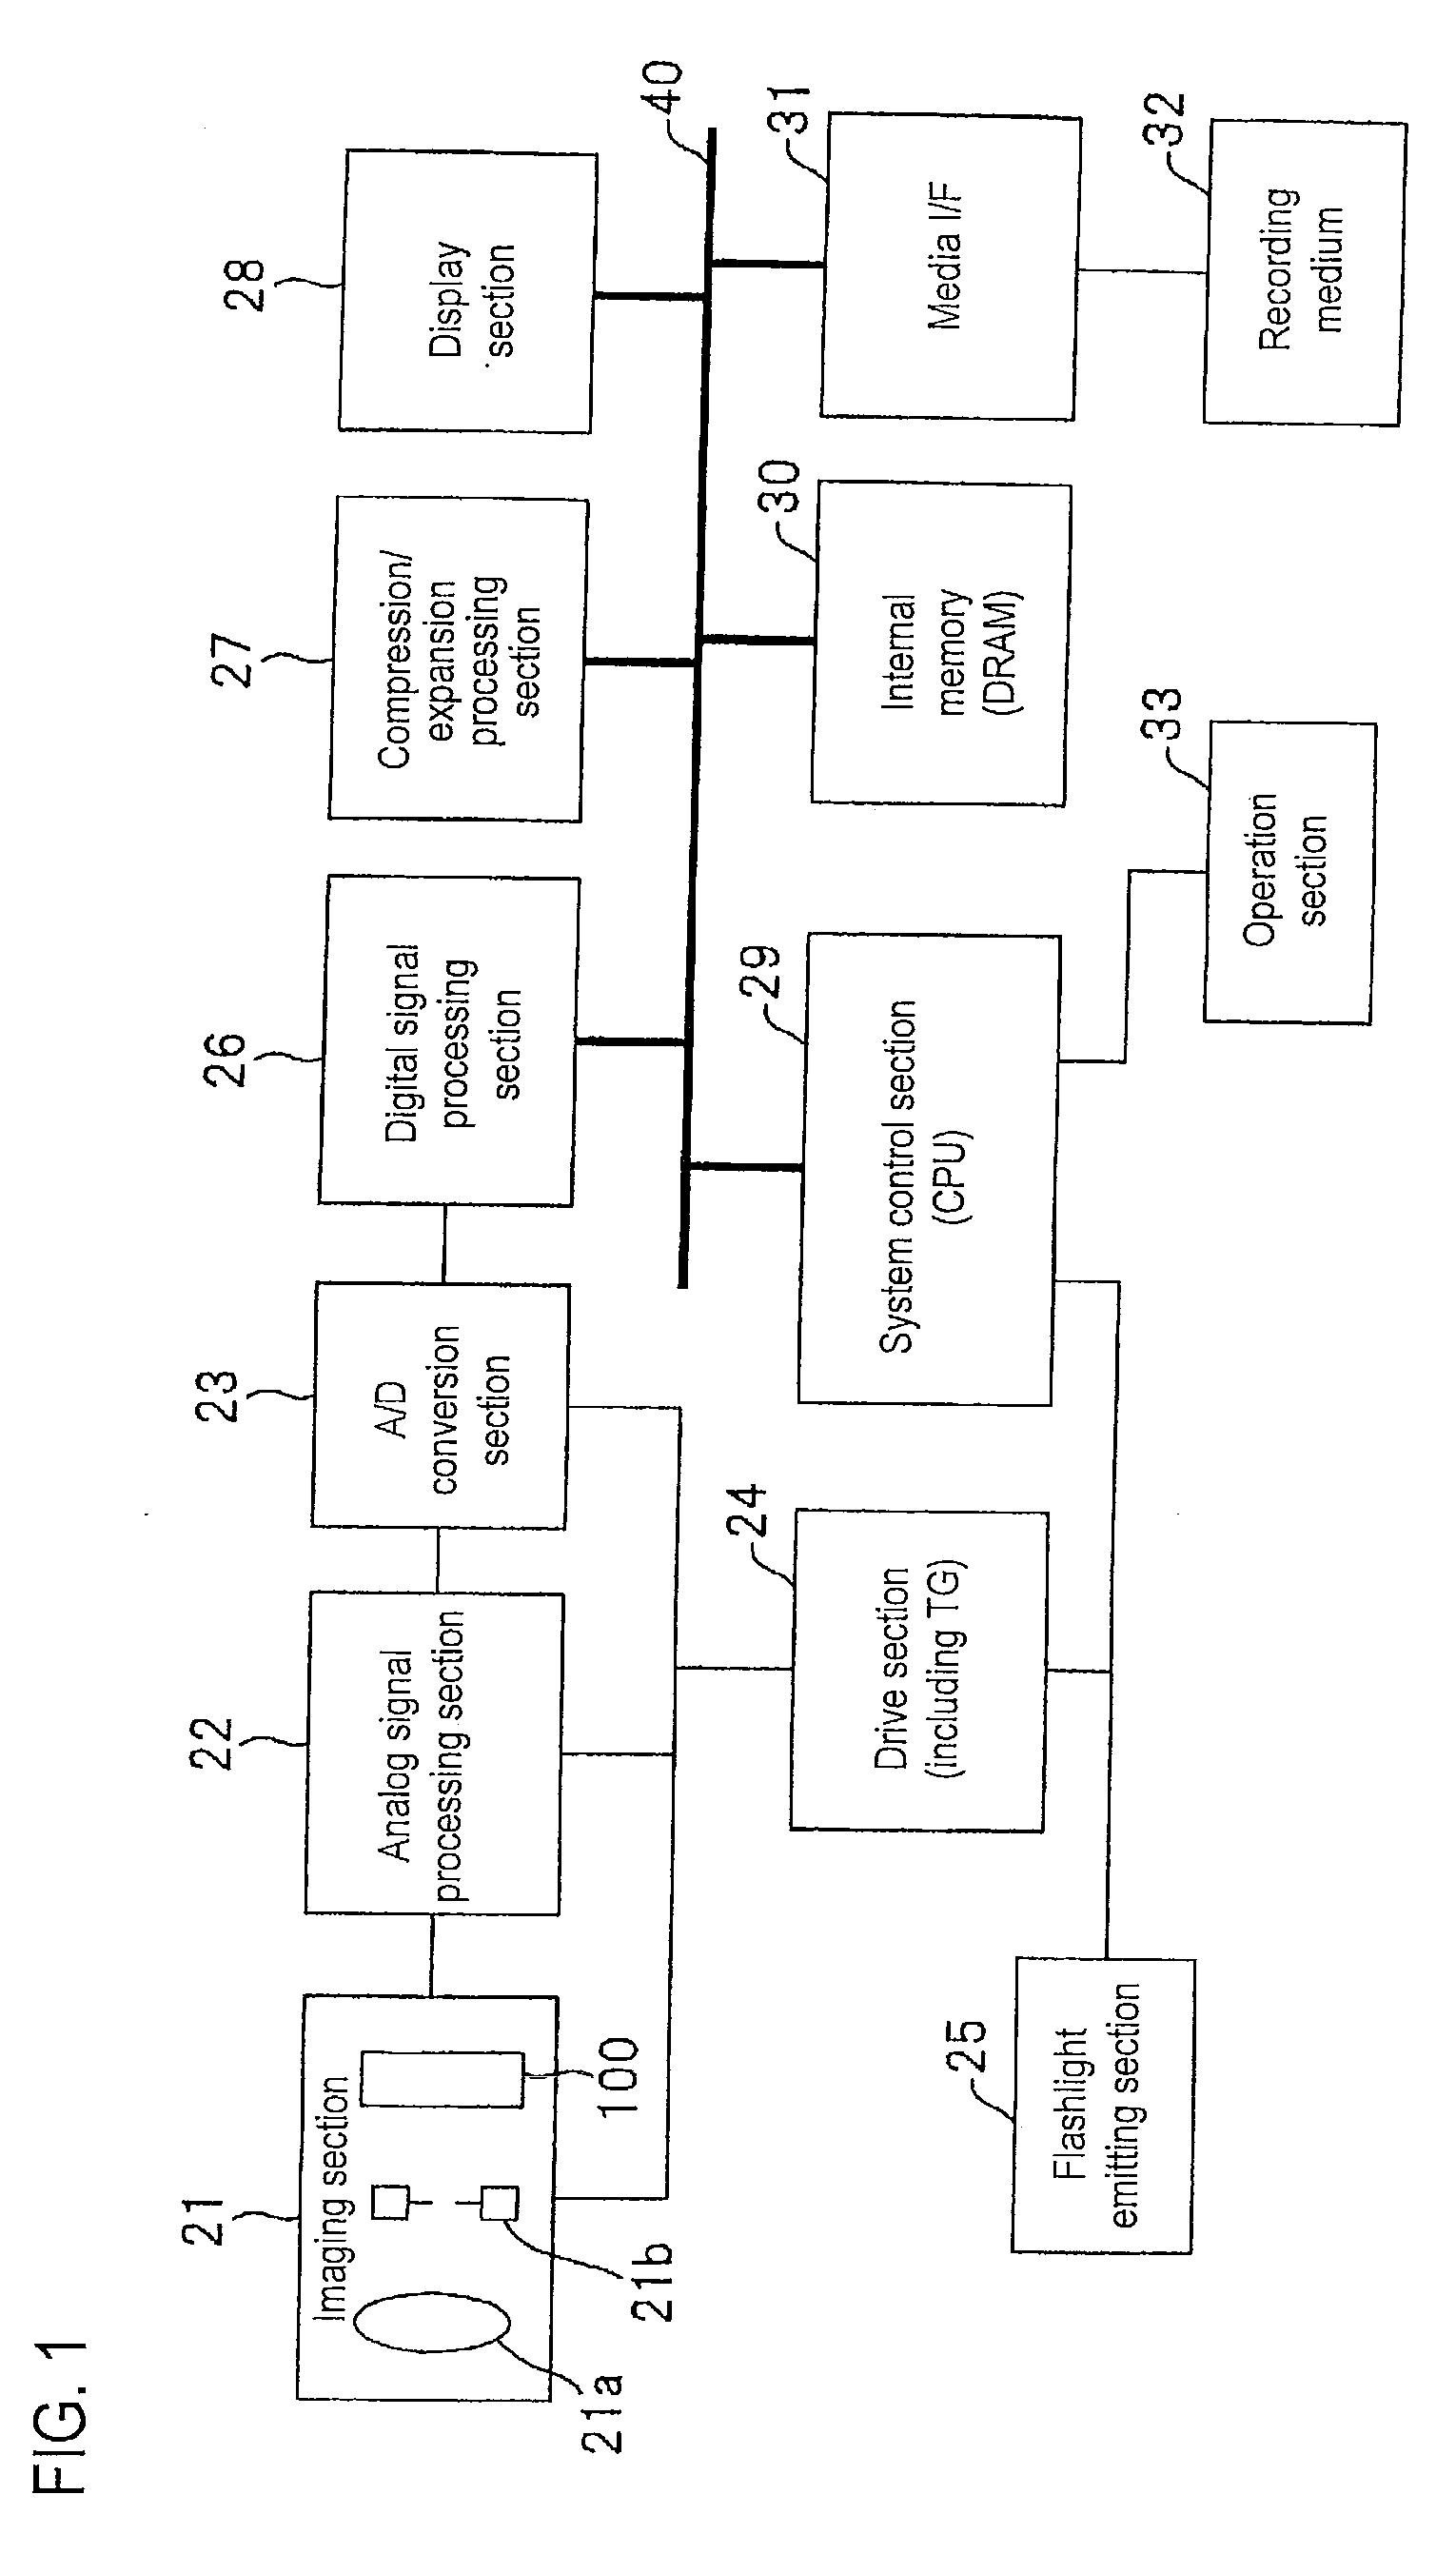 Imaging apparatus and image signal processing method